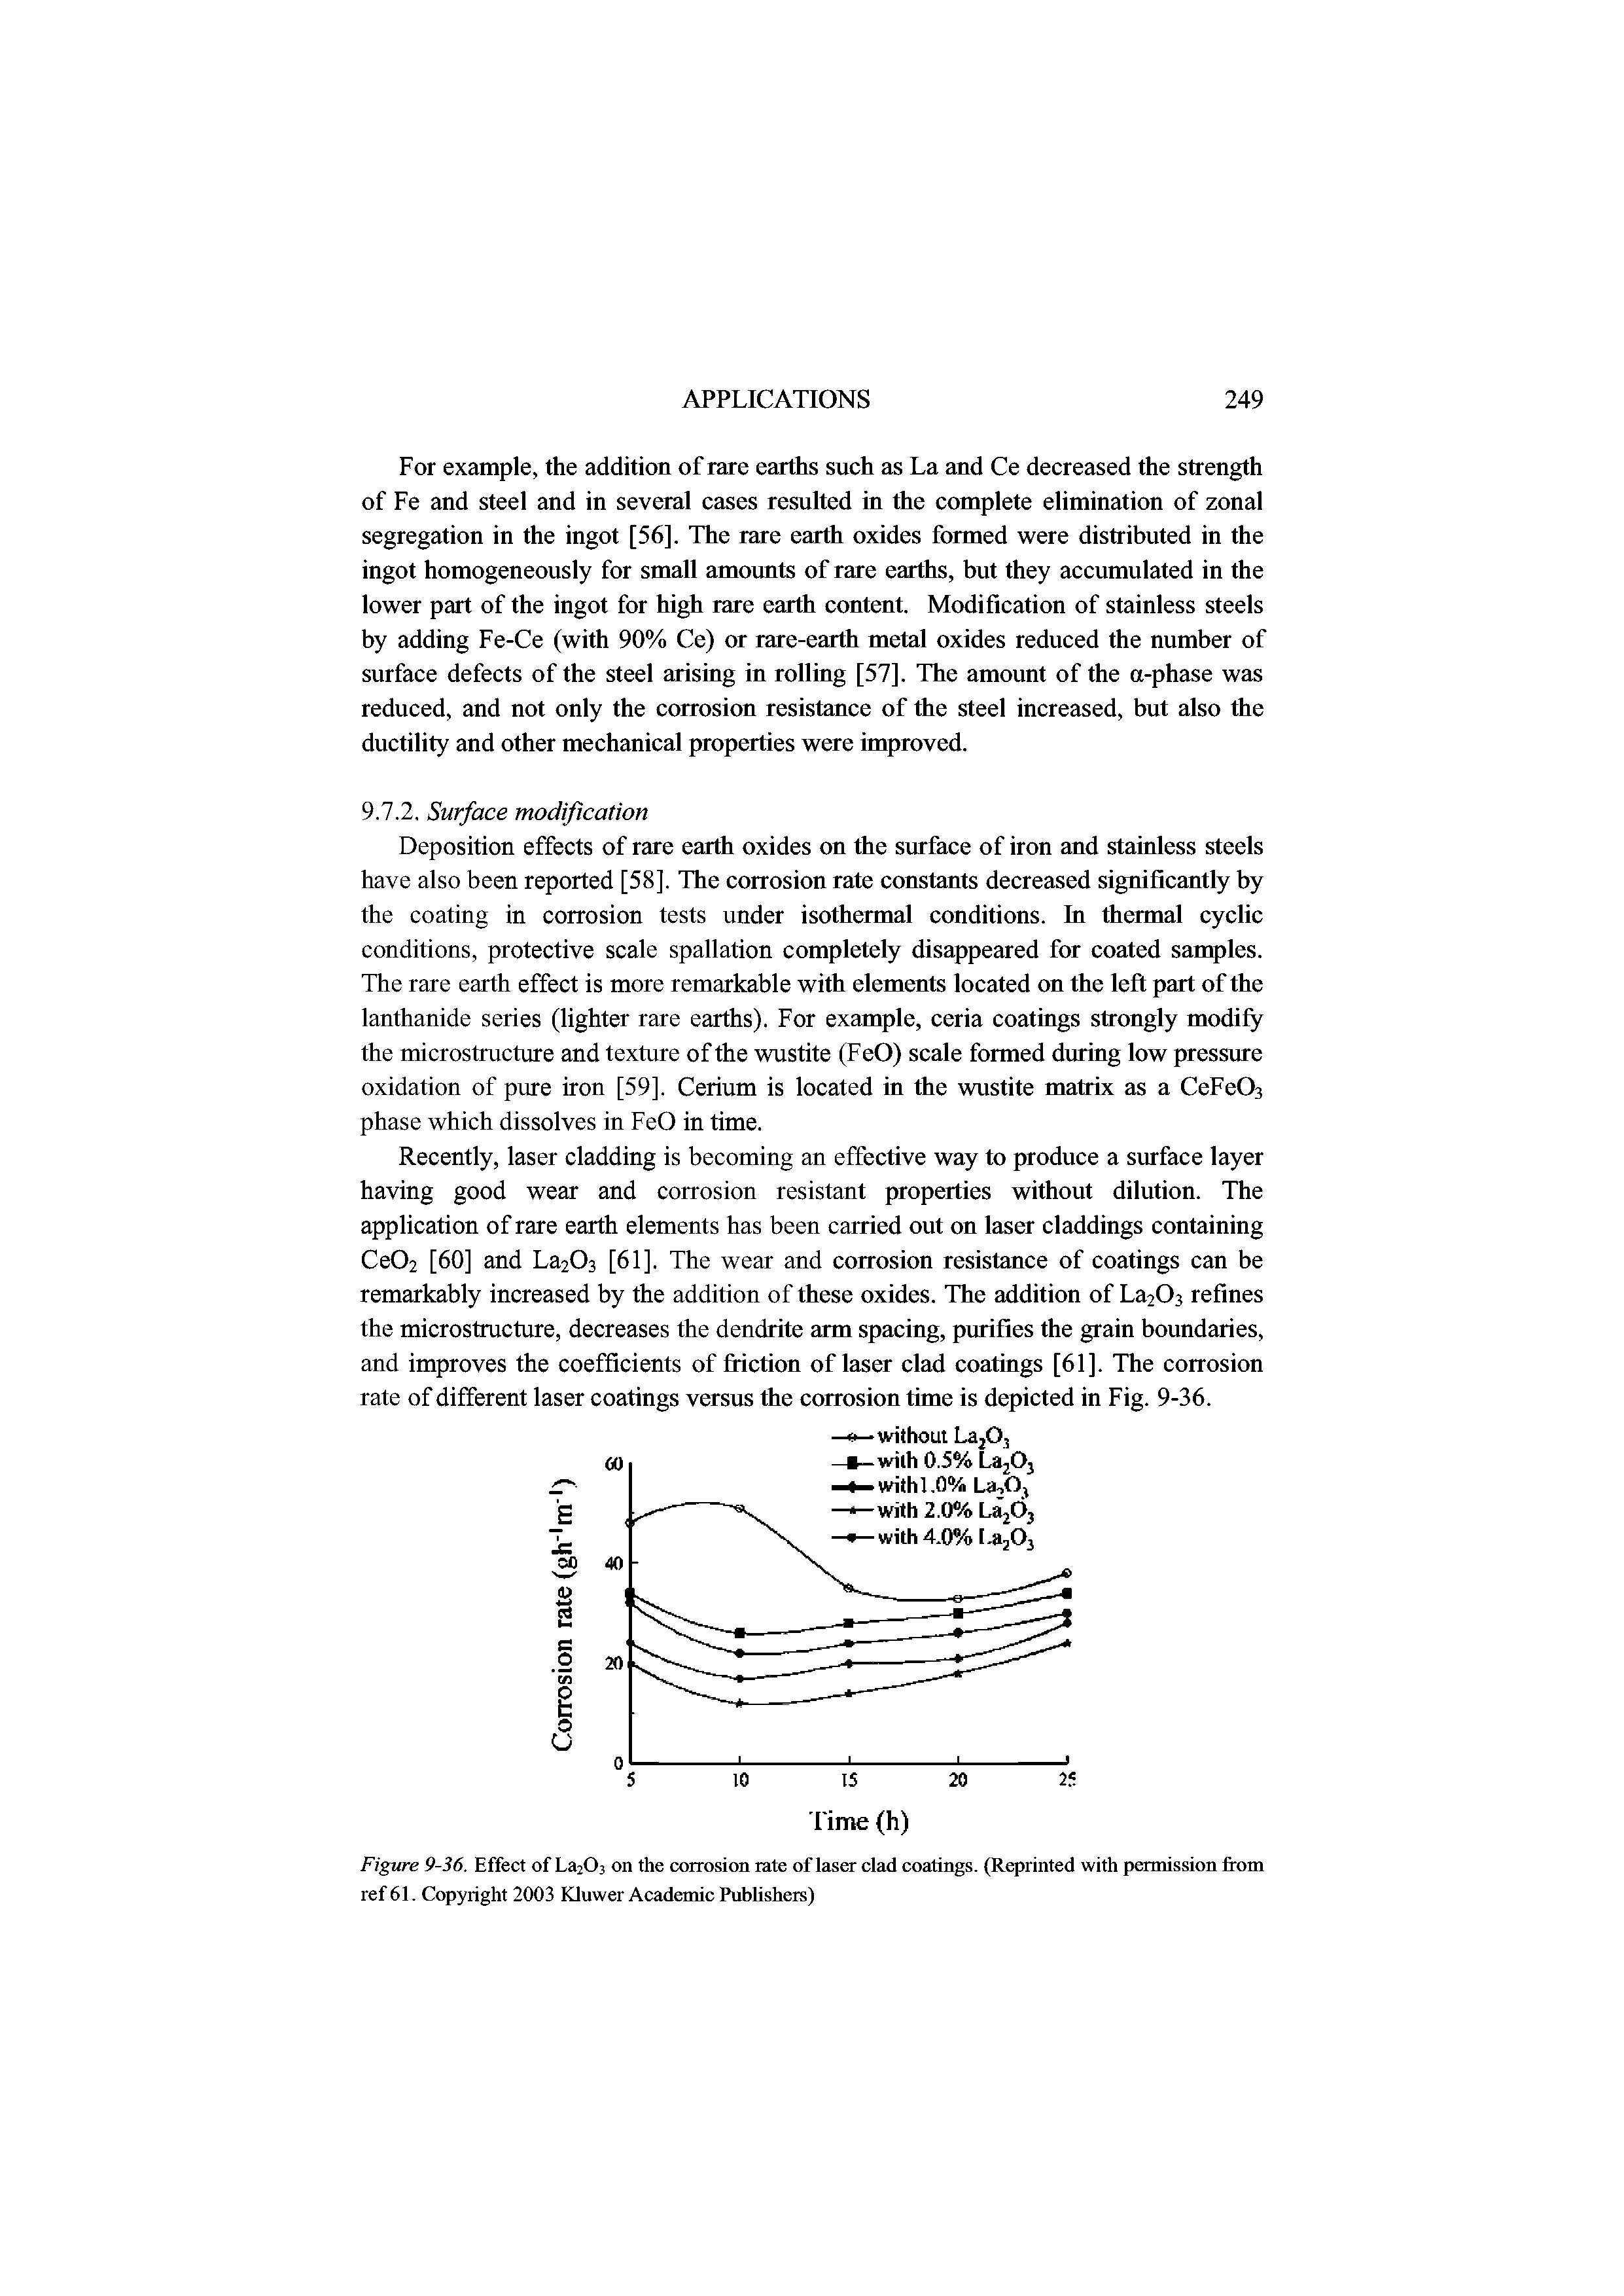 Figure 9-36. Effect of La203 on the corrosion rate of laser clad coatings. (Reprinted with permission om ref 61. Copyright 2003 Kluwer Academic Publishers)...